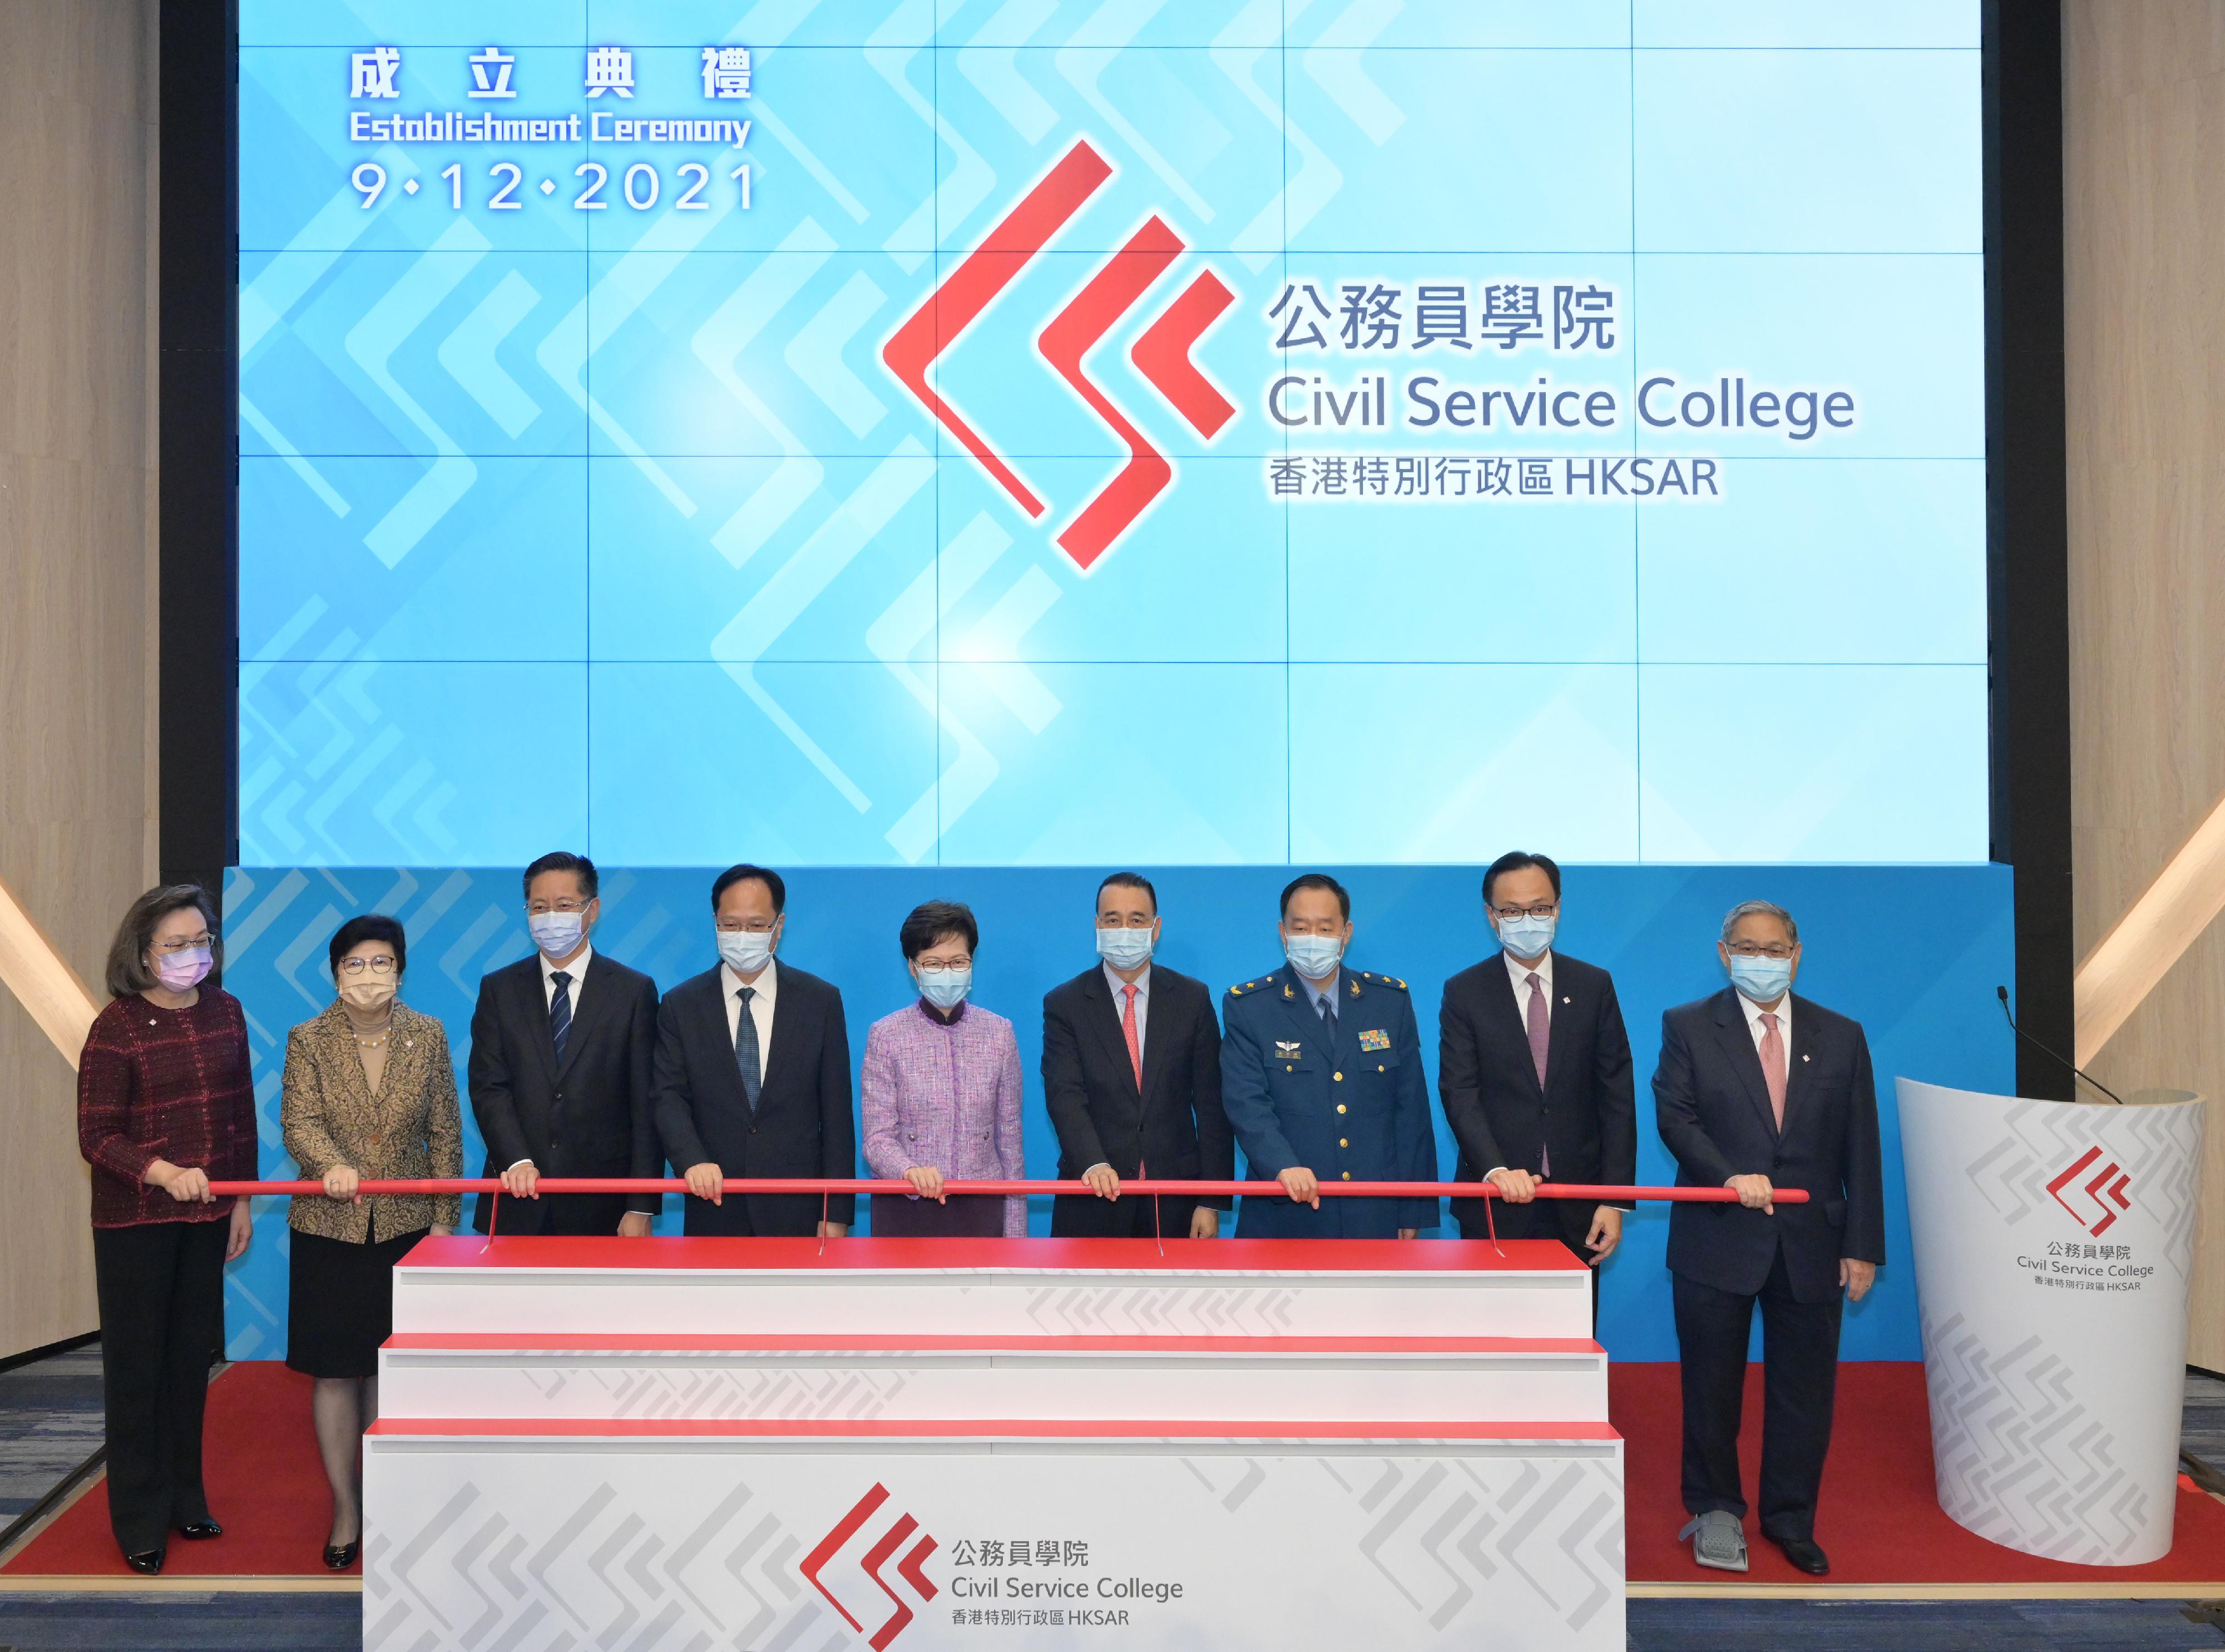 The Chief Executive, Mrs Carrie Lam, attended the Establishment Ceremony of the Civil Service College of the Hong Kong Special Administrative Region (HKSAR) today (December 9). Photo shows (from left) the Permanent Secretary for the Civil Service, Mrs Ingrid Yeung; the Chairman of the Public Service Commission, Mrs Rita Lau; Deputy Head of the Office for Safeguarding National Security of the Central People's Government in the HKSAR Mr Li Jiangzhou; Deputy Director of the Liaison Office of the Central People's Government in the HKSAR Mr Chen Dong; Mrs Lam;  the Commissioner of the Ministry of Foreign Affairs of the People's Republic of China in the HKSAR, Mr Liu Guangyuan; the Director of the Political Department of the Chinese People's Liberation Army Hong Kong Garrison, Major General Sun Jushun; the Secretary for the Civil Service, Mr Patrick Nip; and the Chairman of the Civil Service Training Advisory Board, Dr Victor Fung, officiating at the ceremony. 
